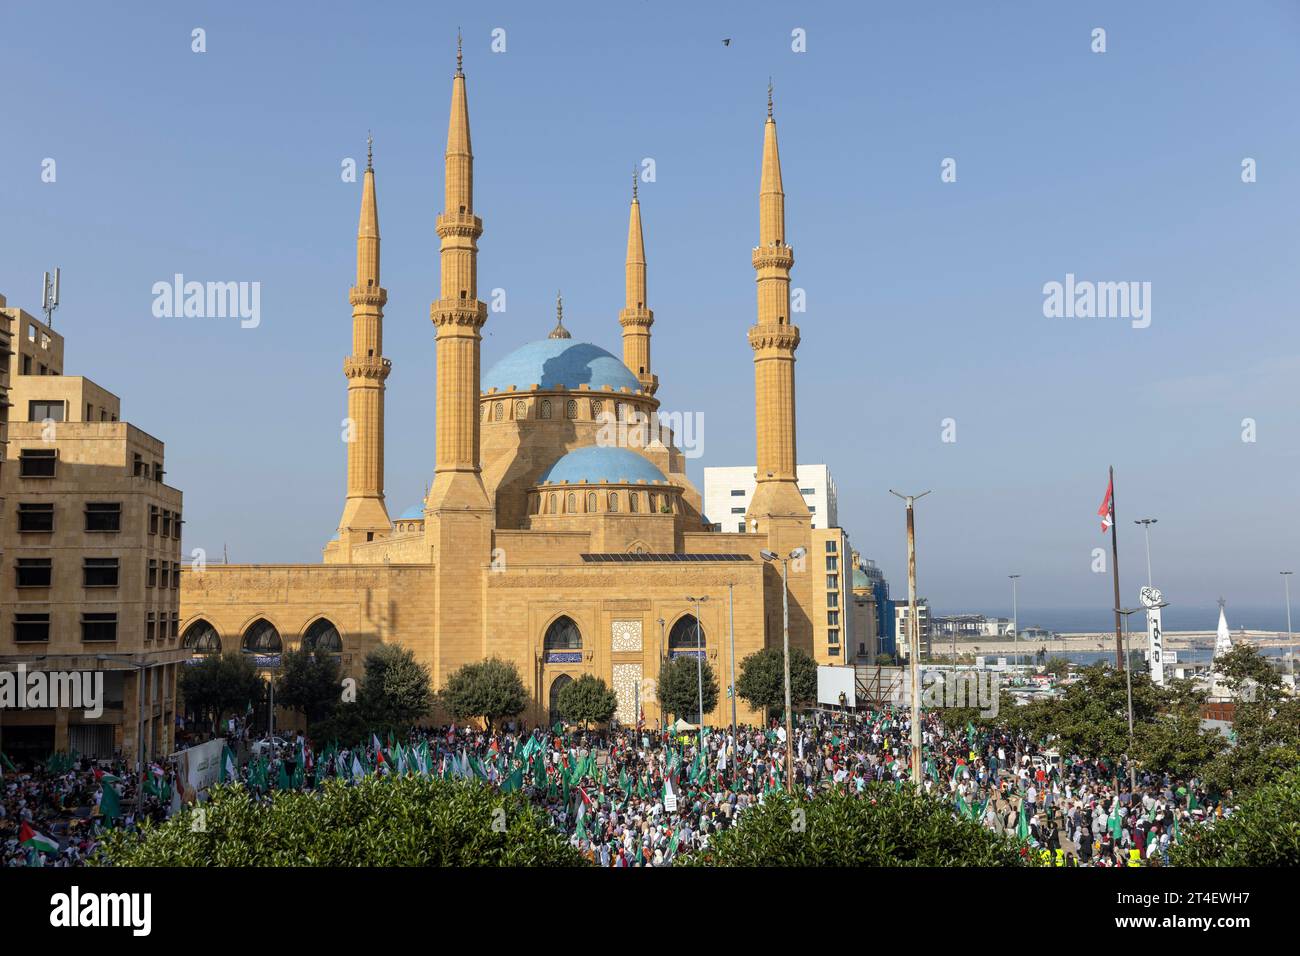 Beirut, Lebanon. 29th Oct, 2023. The Mohammad Al-Amin Mosque towers over people attending a demonstration by the Hamas party at Beirut, Lebanon on Oct. 29, 2023. Gaza Health Ministry said more than 8,000 Palestinians have been killed since Hamas attacked Israel on October 7. Tensions are high in Lebanon as skirmishes between Hezbollah and the Israeli military increase along the Lebanon-Israel border, and the possibility of war between the two looms on the horizon. The skirmishes have displaced at least 28,965 people in Lebanon according to International Organization for Migration. (Credit Im Stock Photo